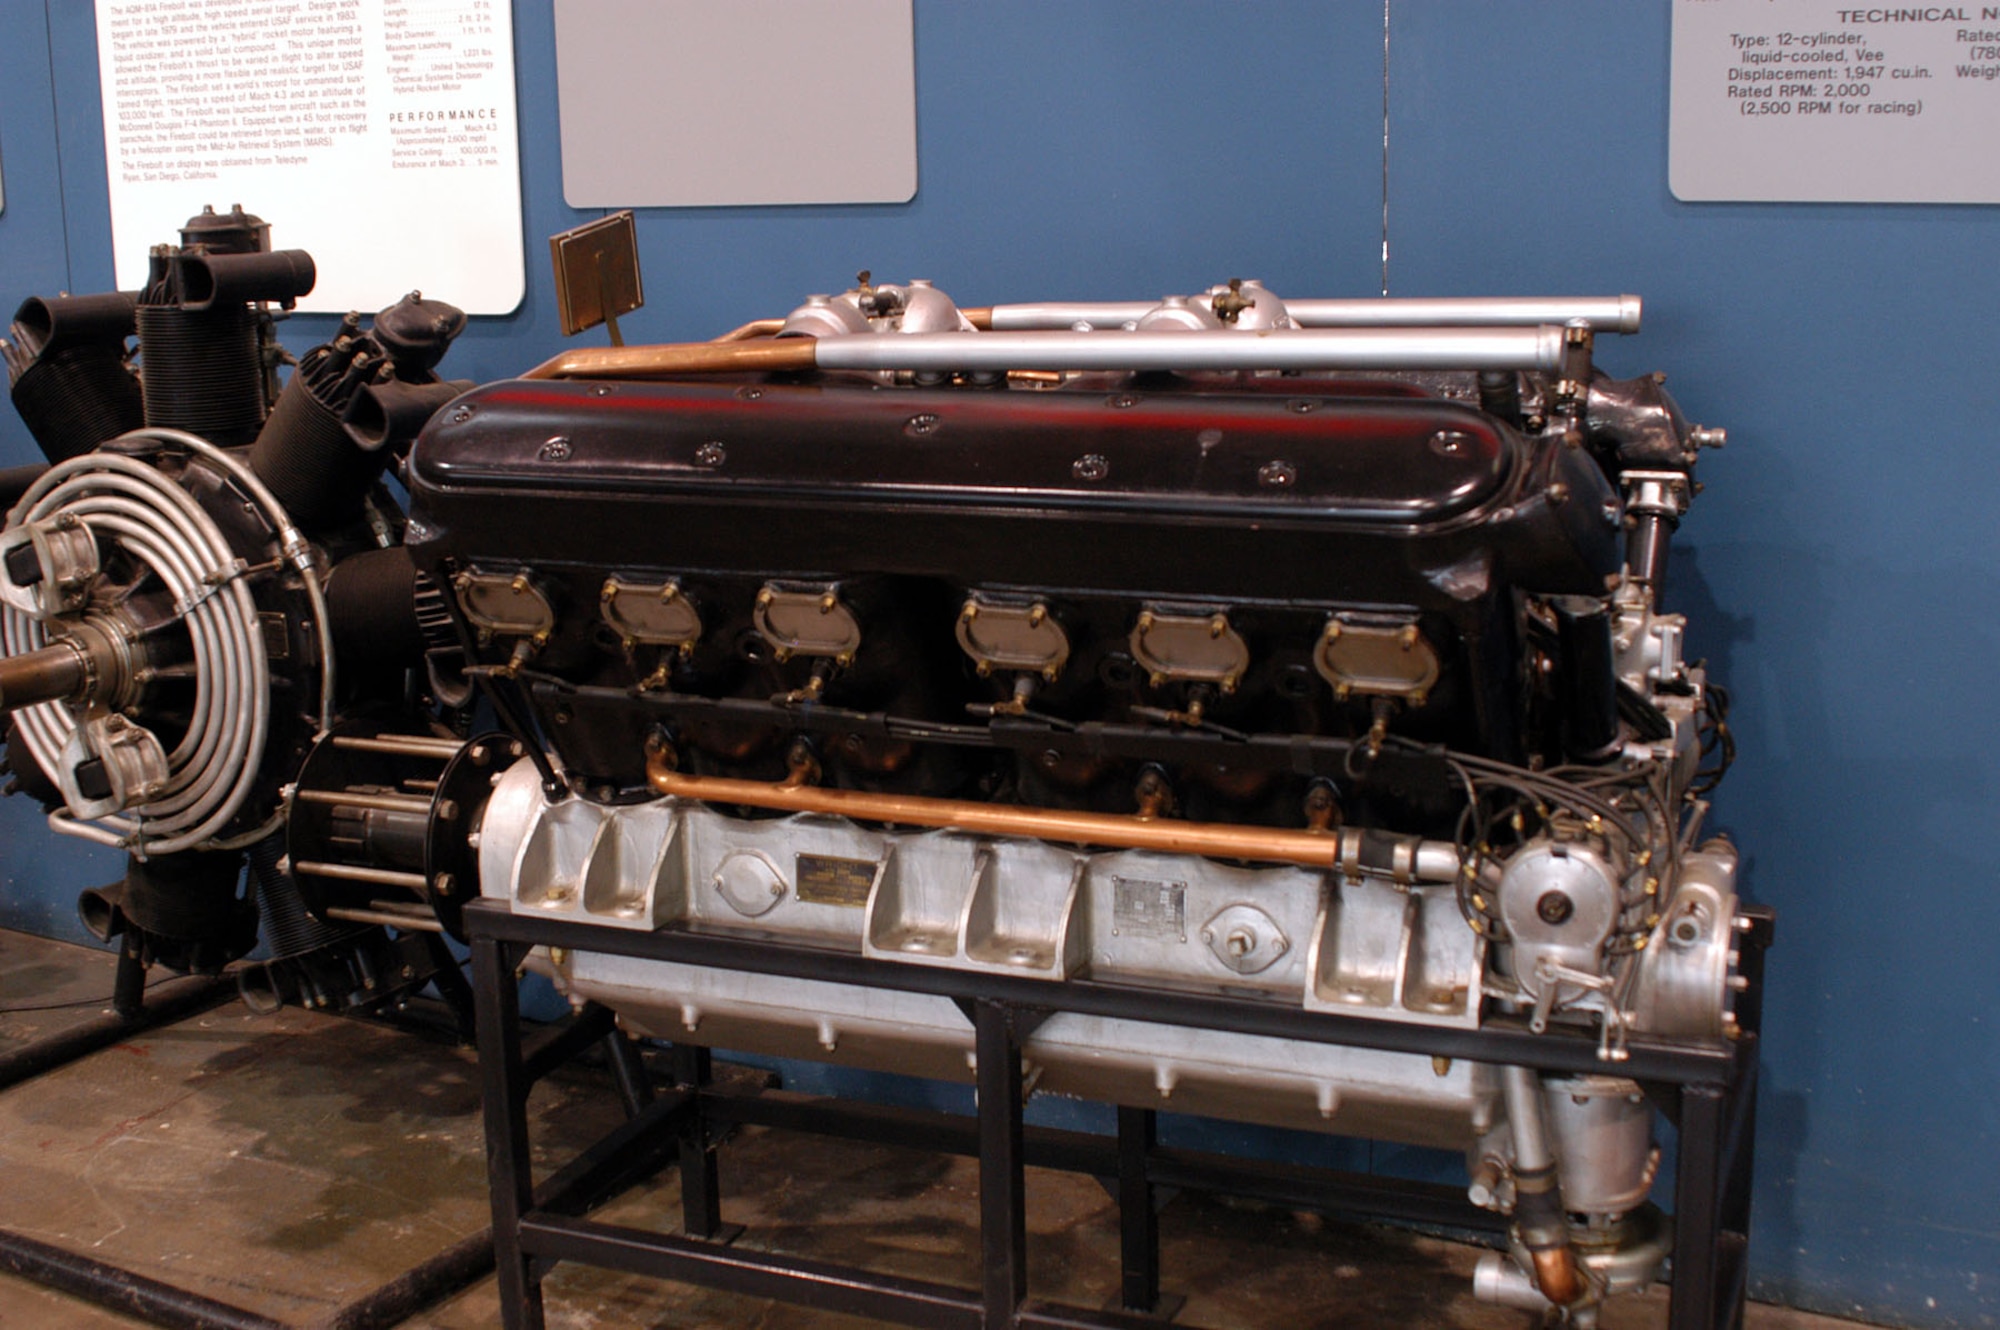 DAYTON, Ohio -- Wright T-3 engine on display in the Research & Development Gallery at the National Museum of the United States Air Force. (U.S. Air Force photo)